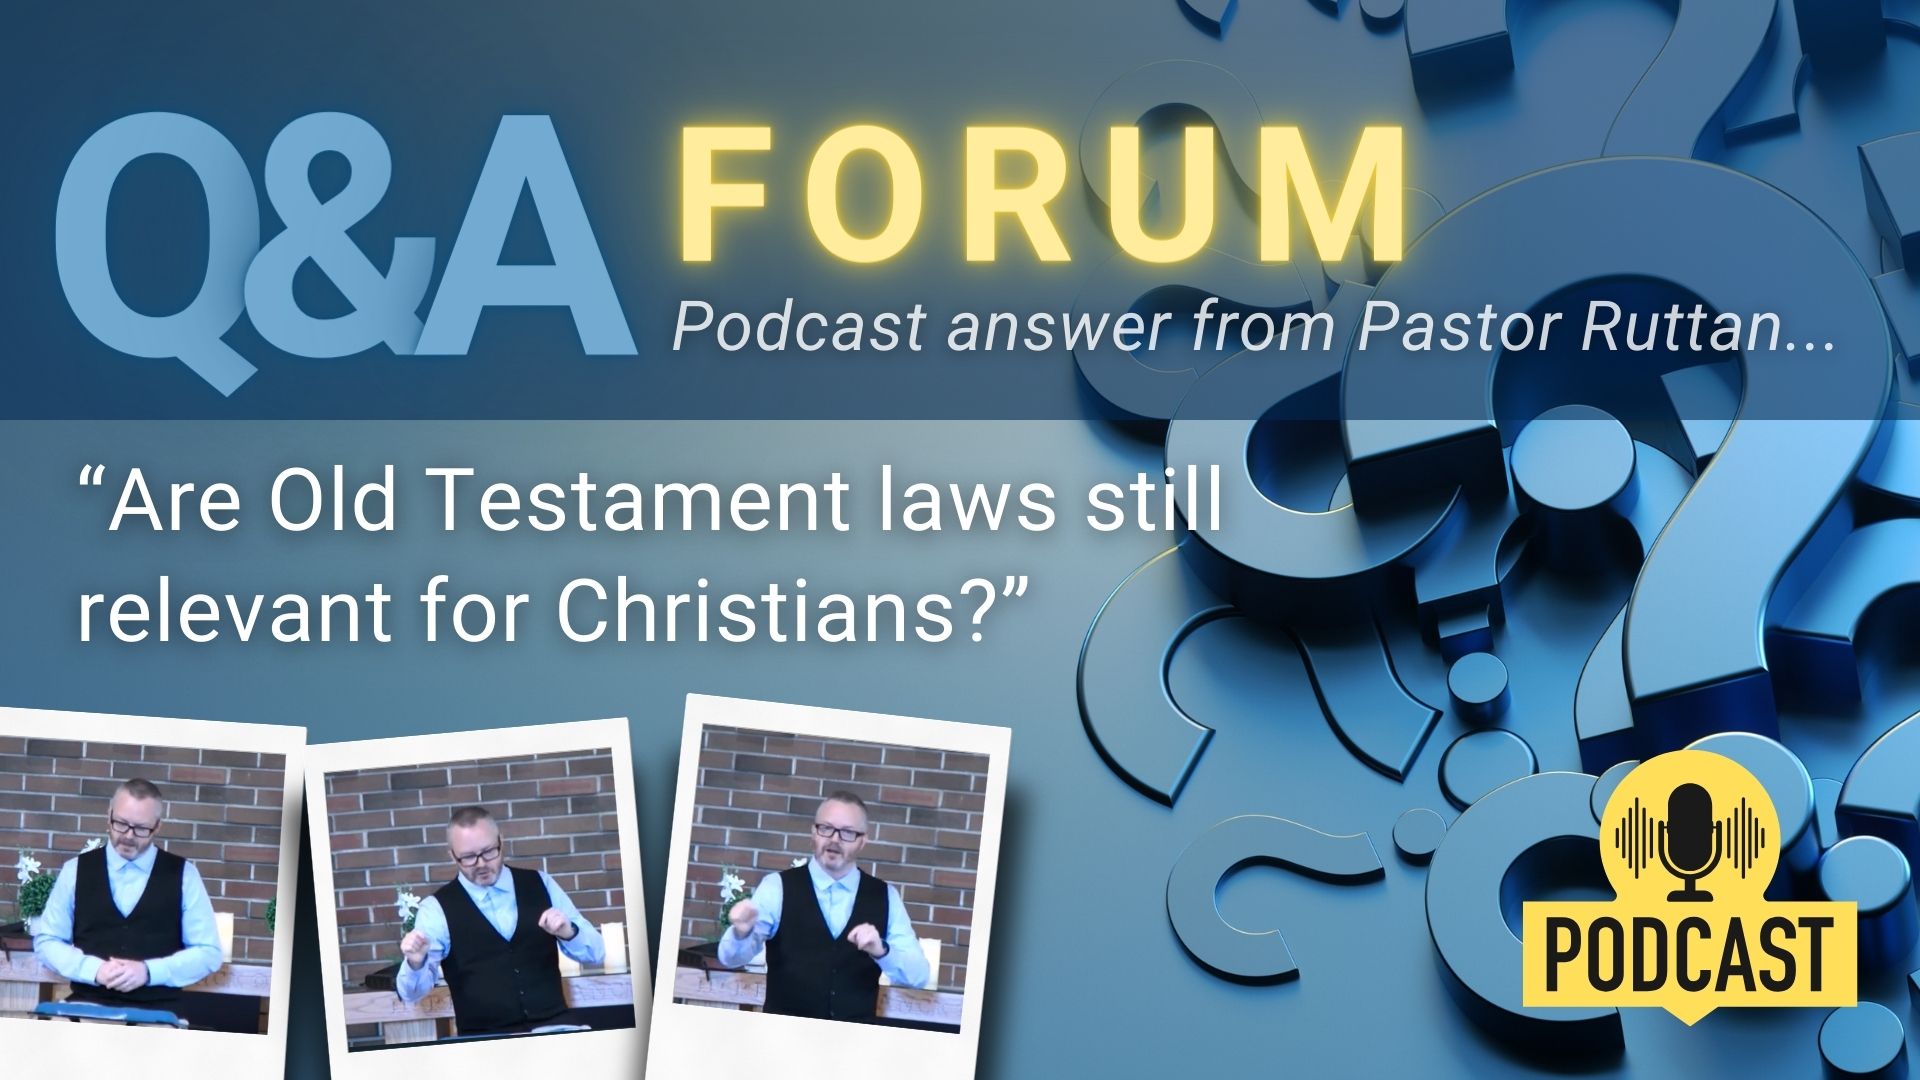 "Are Old Testament laws still relevant for Christians?"